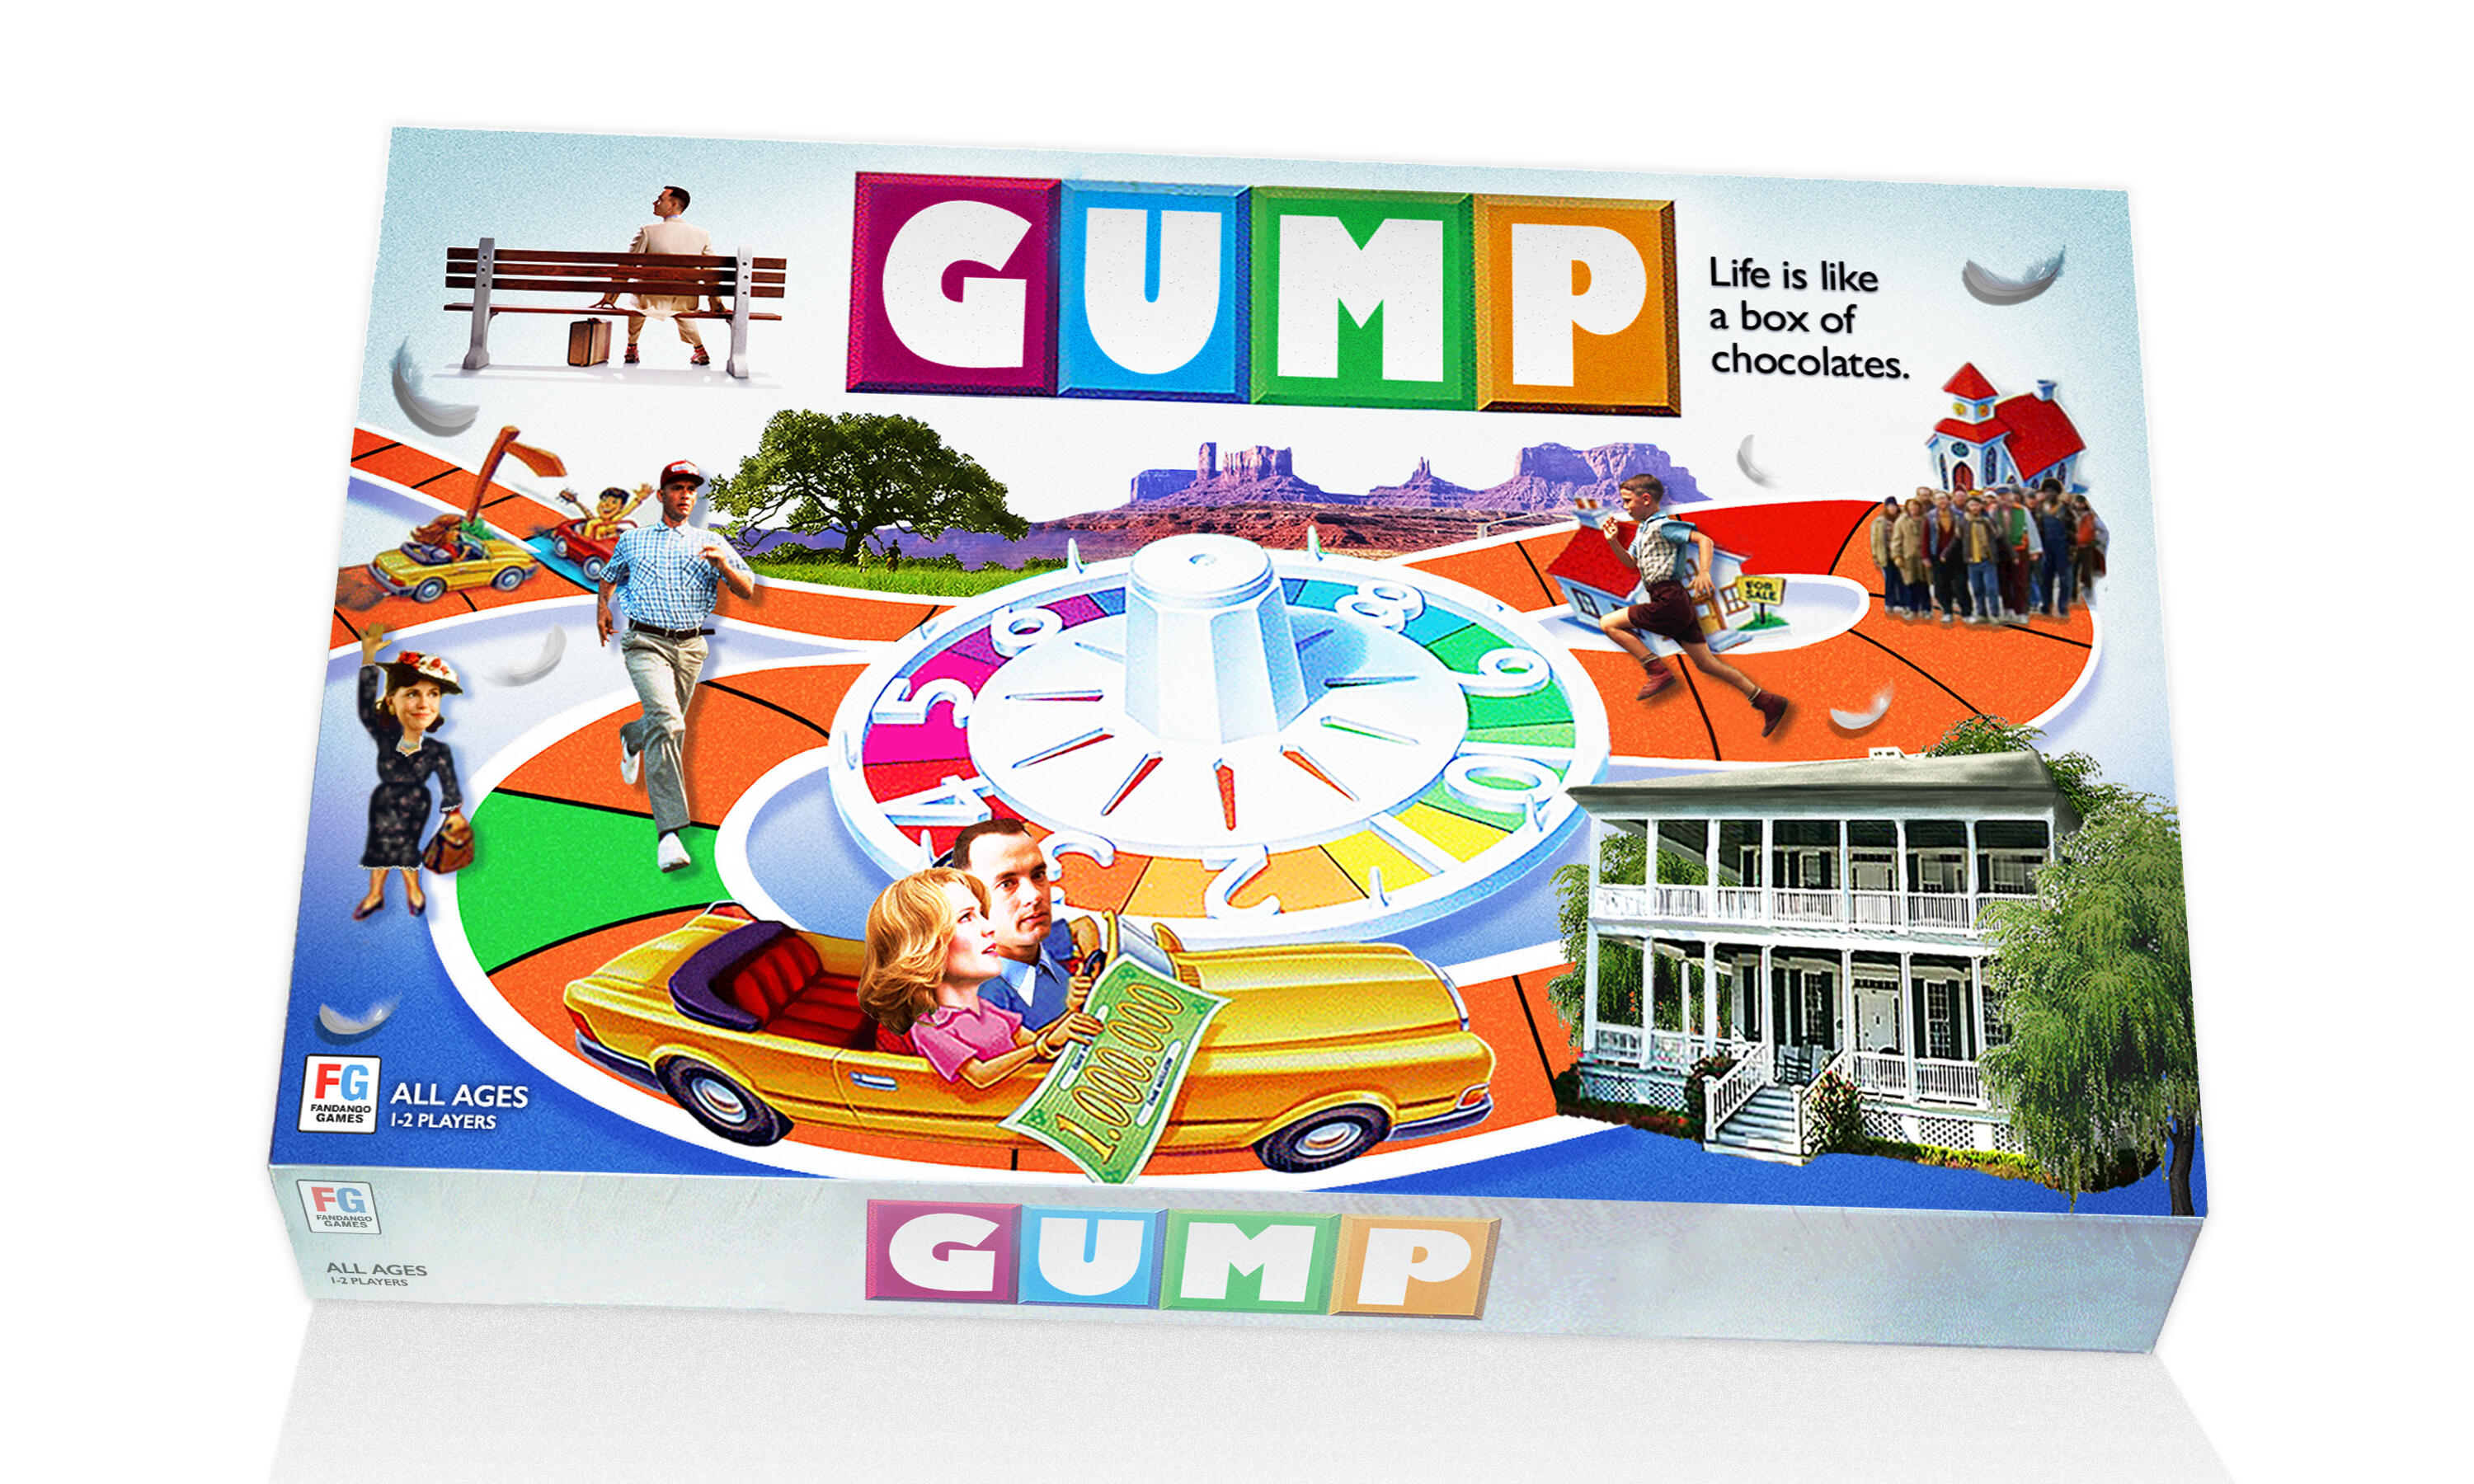 Movie-Inspired Board Games That We'd Like to Play